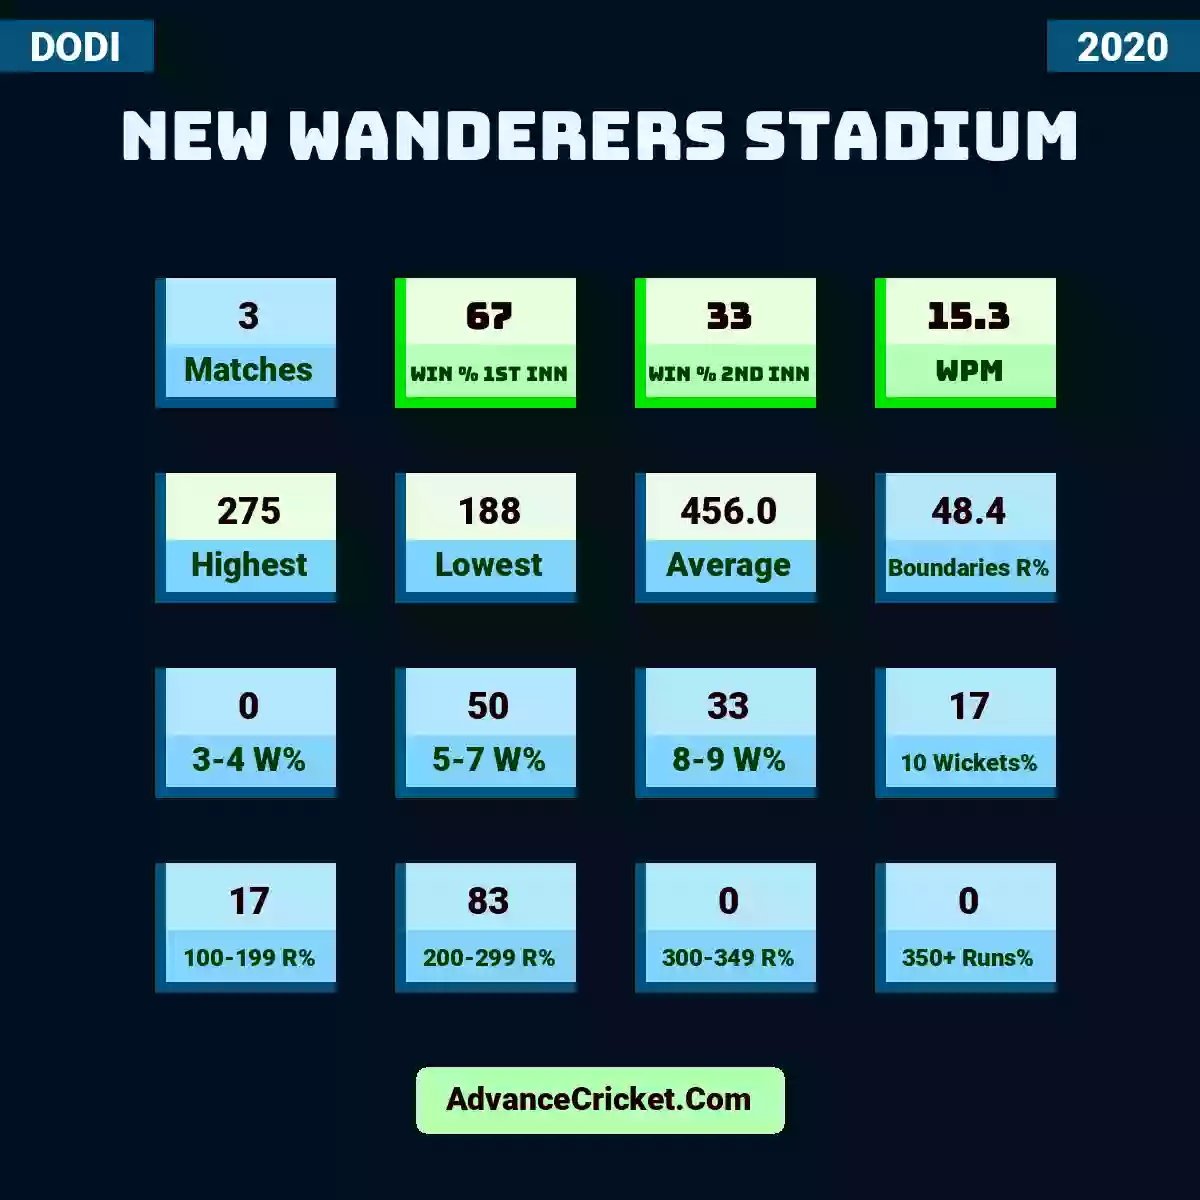 Image showing New Wanderers Stadium with Matches: 3, Win % 1st Inn: 67, Win % 2nd Inn: 33, WPM: 15.3, Highest: 275, Lowest: 188, Average: 456.0, Boundaries R%: 48.4, 3-4 W%: 0, 5-7 W%: 50, 8-9 W%: 33, 10 Wickets%: 17, 100-199 R%: 17, 200-299 R%: 83, 300-349 R%: 0, 350+ Runs%: 0.